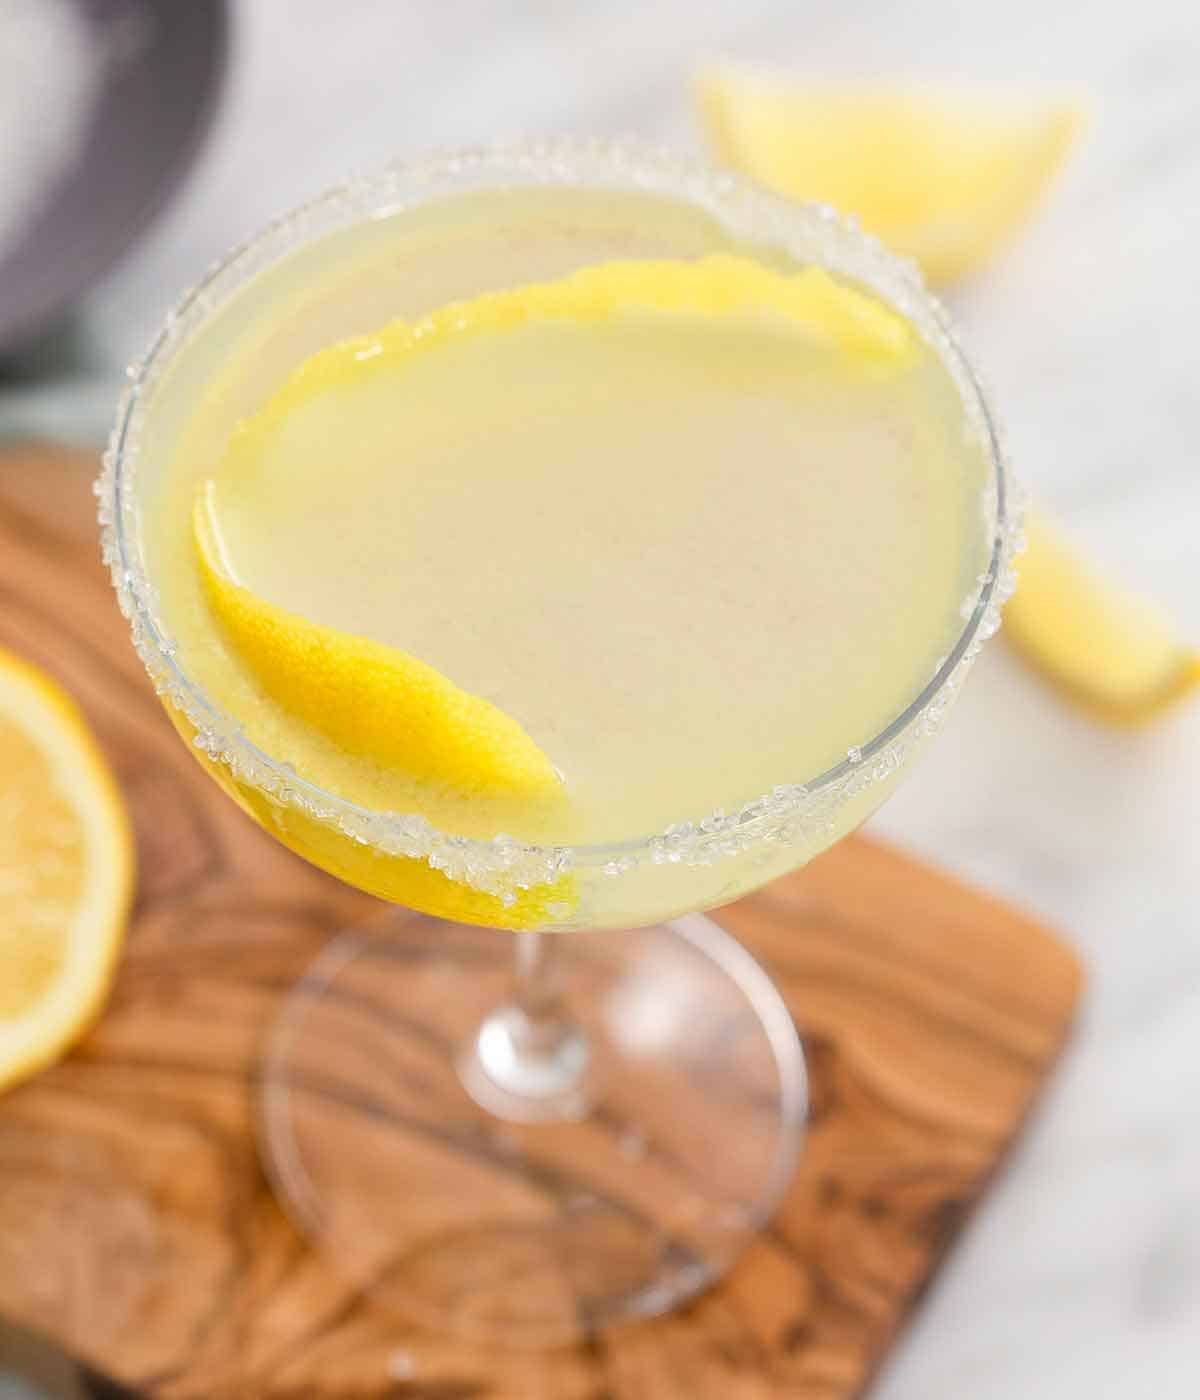 Angled view of a cocktail glass of a lemon drop martini with sugar on its rim and lemon peel in the drink.